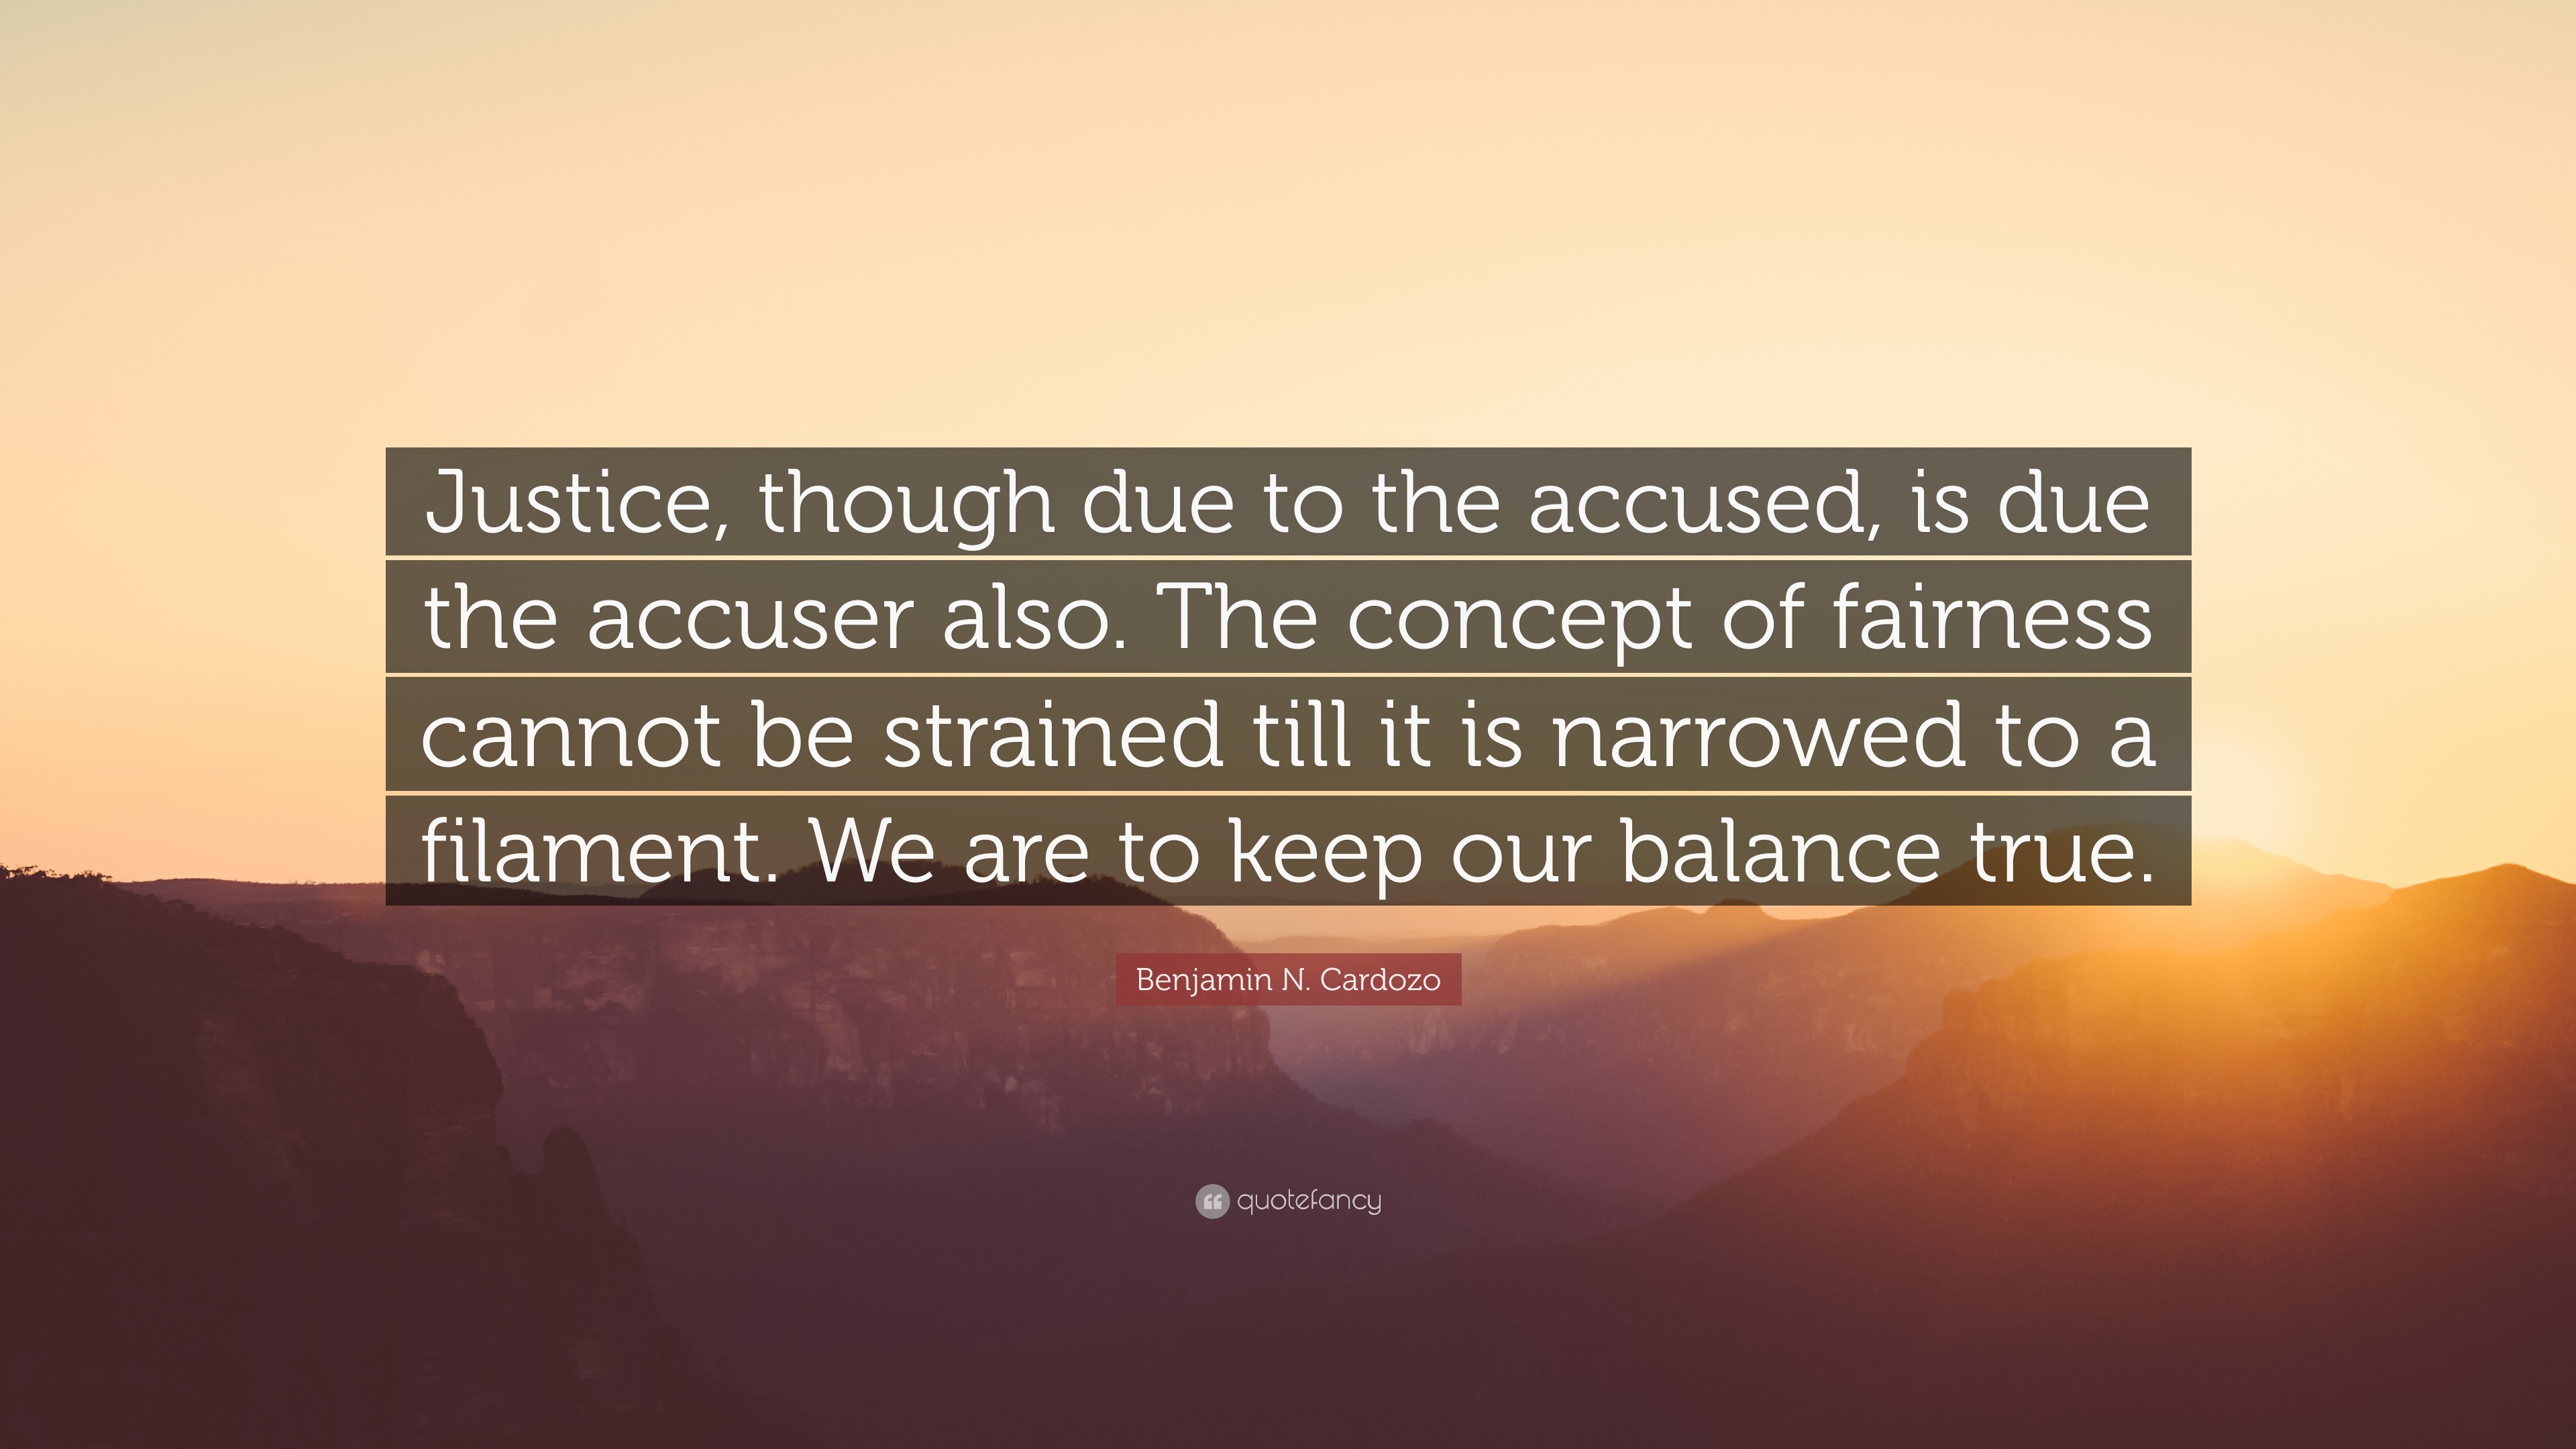 Benjamin N. Cardozo Quote: “Justice, though due to the accused, is due